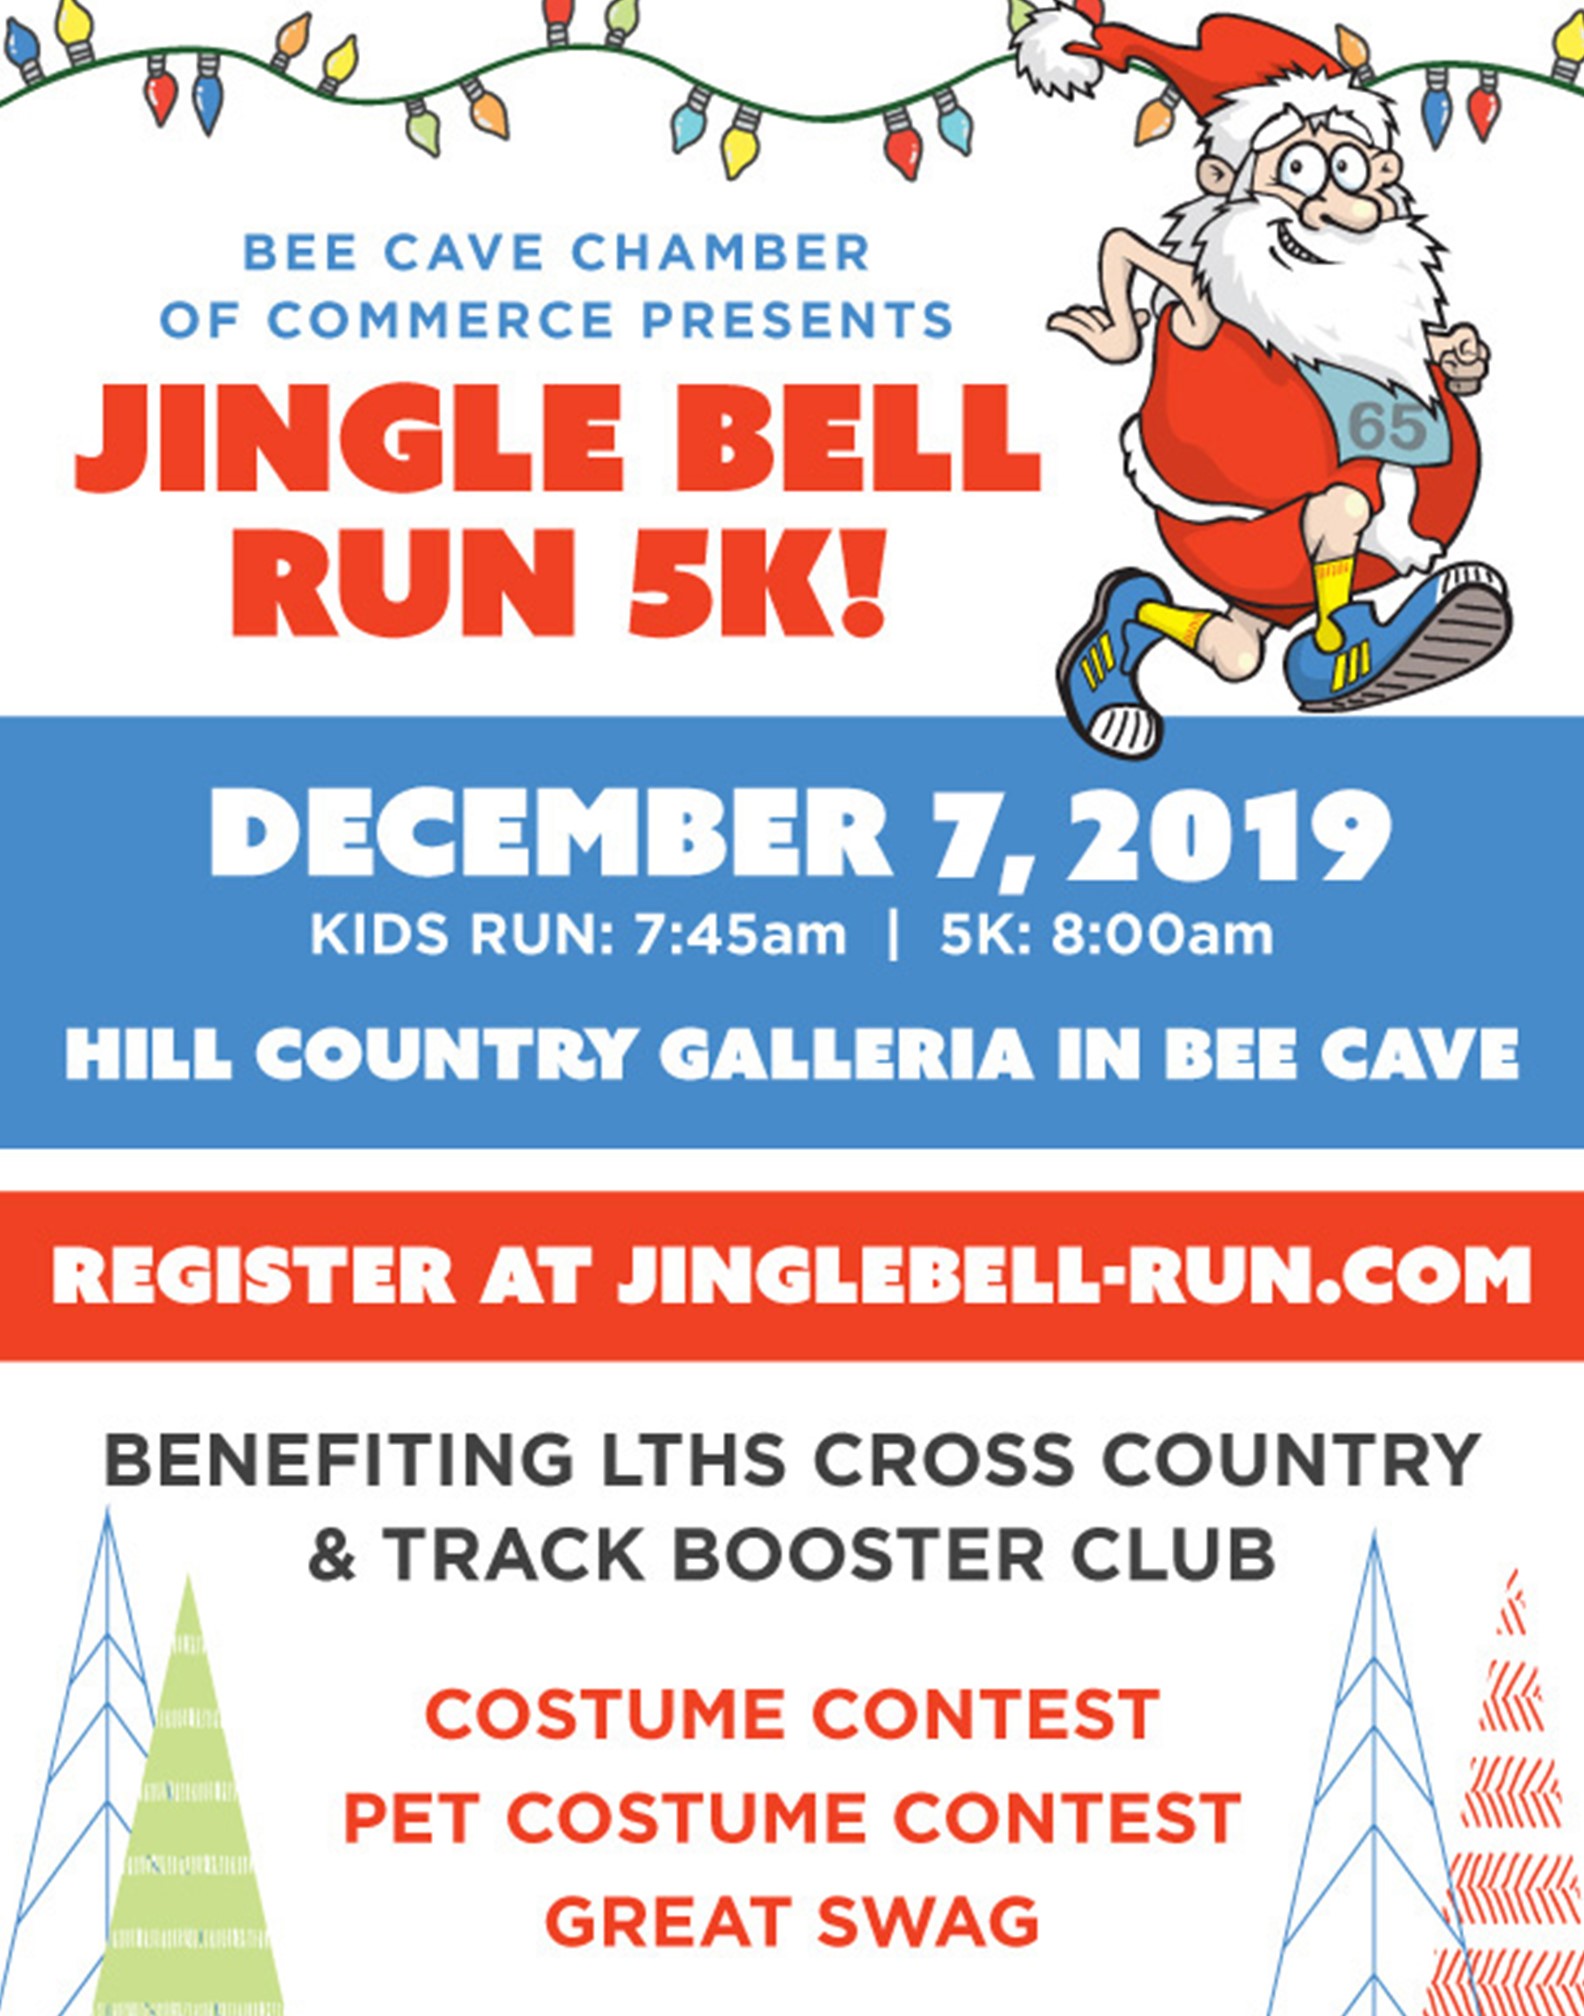 Special Event Jingle Bell Run 5k